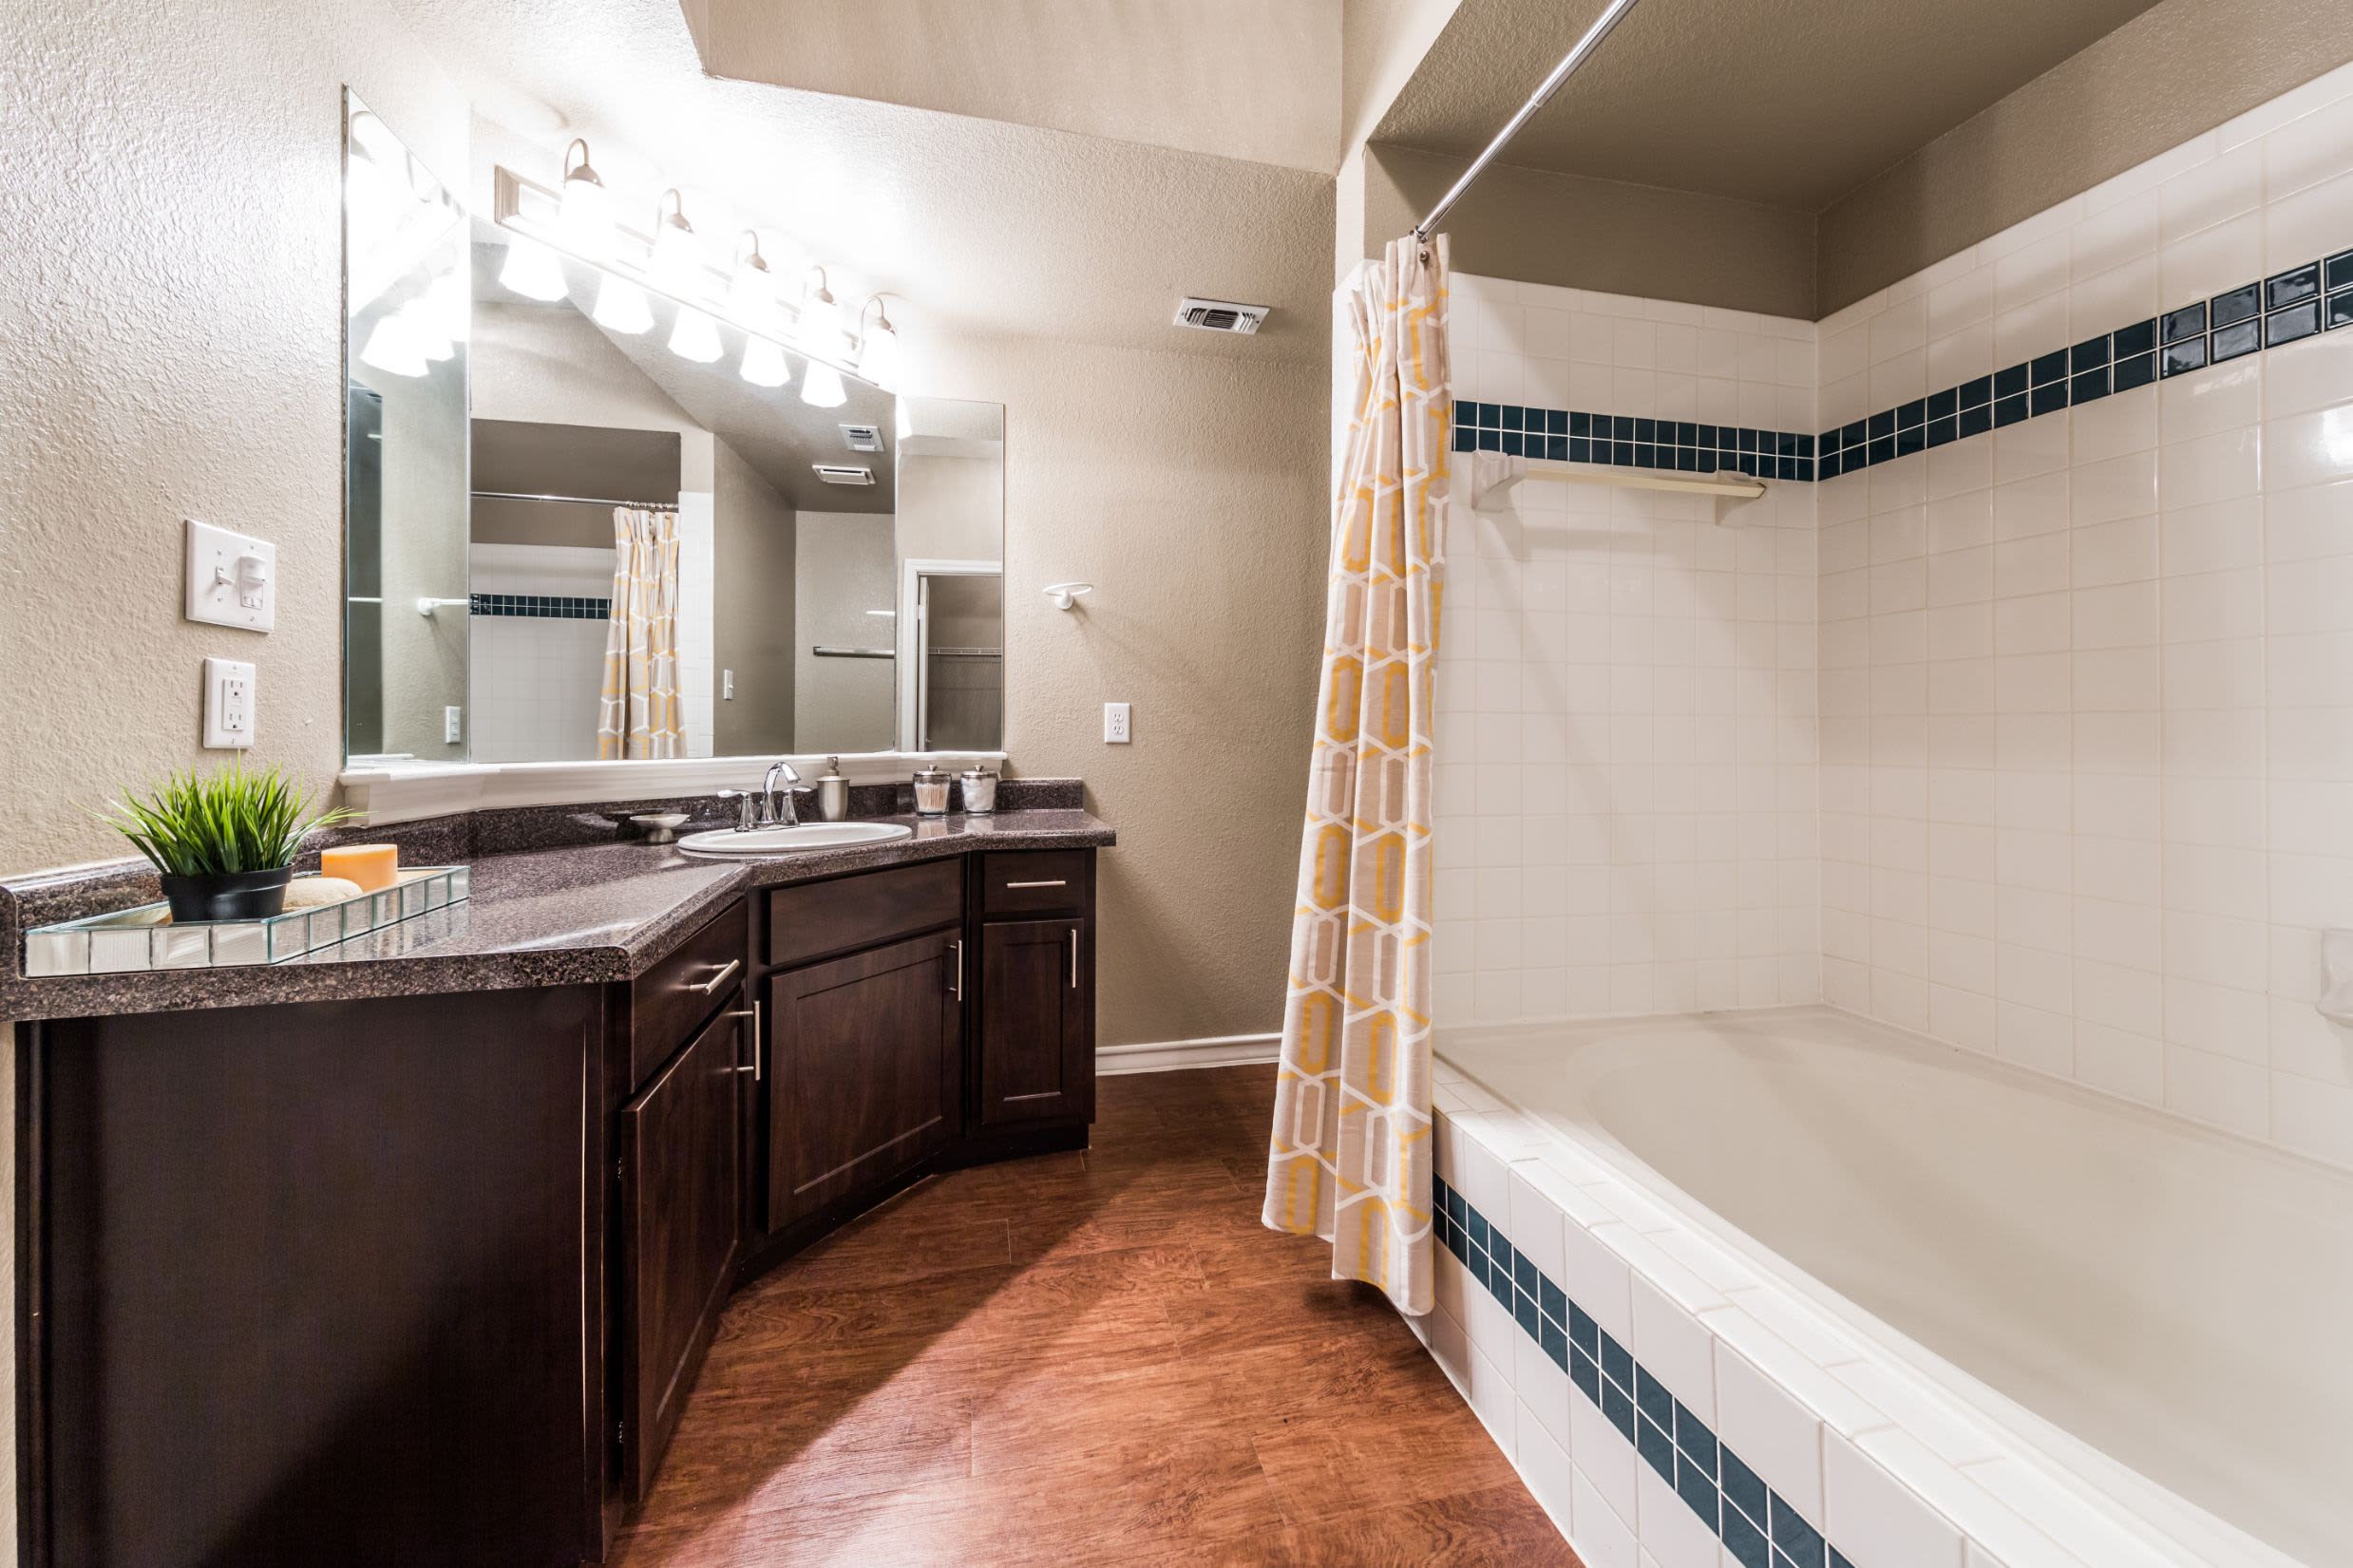 Bathroom with a bathtub and shower at Marquis at Deerfield in San Antonio, Texas